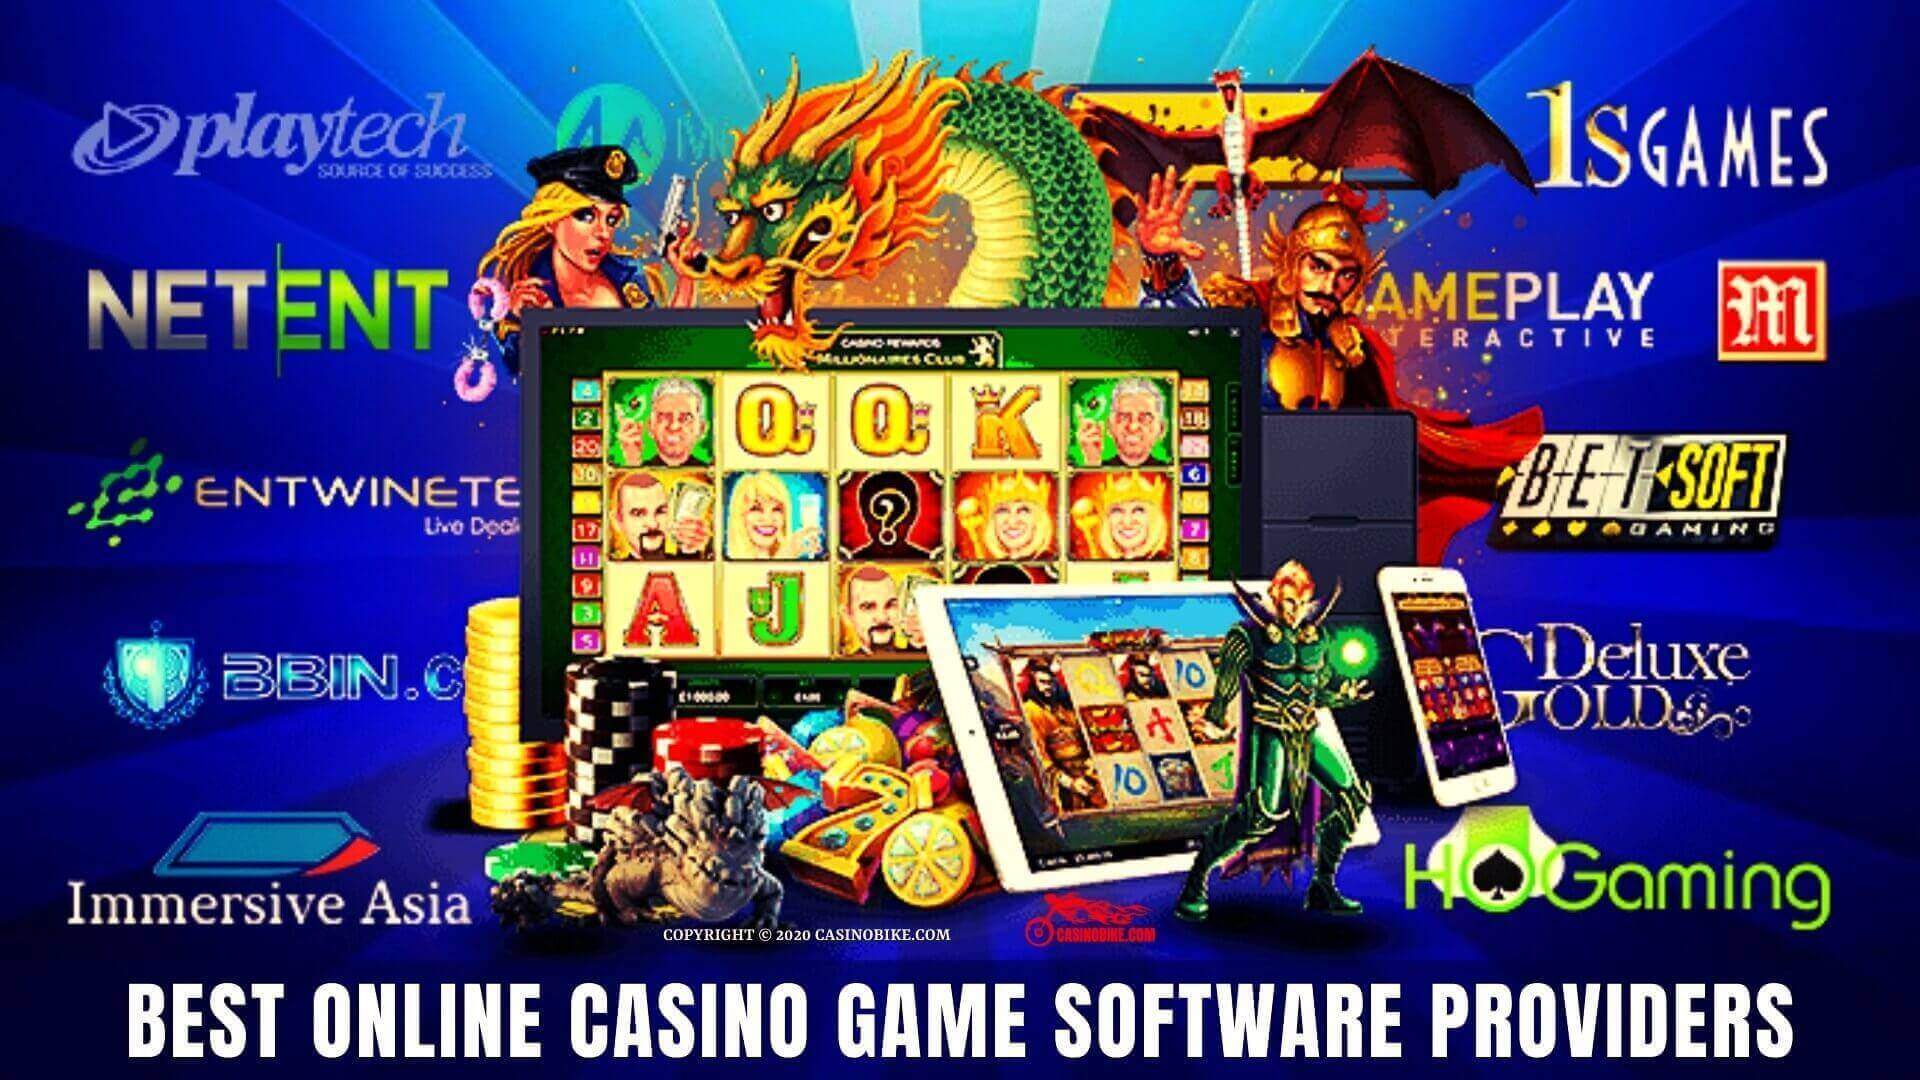 Best Online Casino Game Software Providers